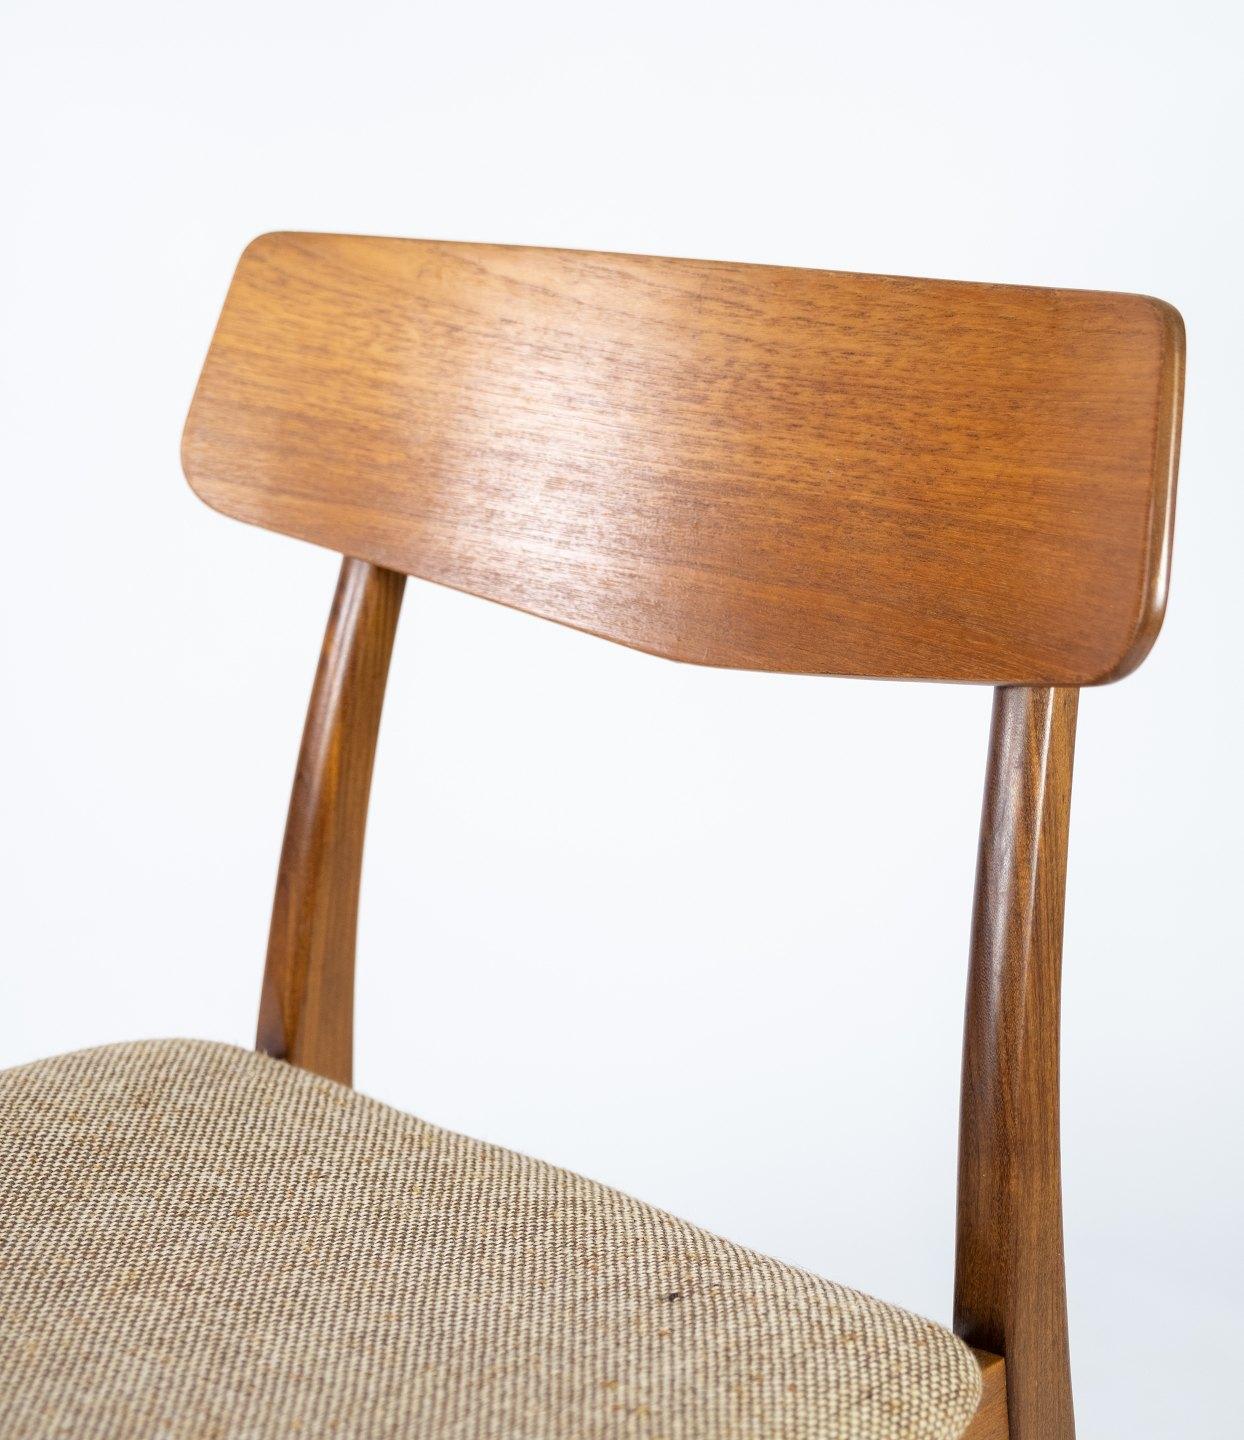 Dining Room Chair in Teak and Light Fabric of Danish Design from the 1960s In Good Condition For Sale In Lejre, DK